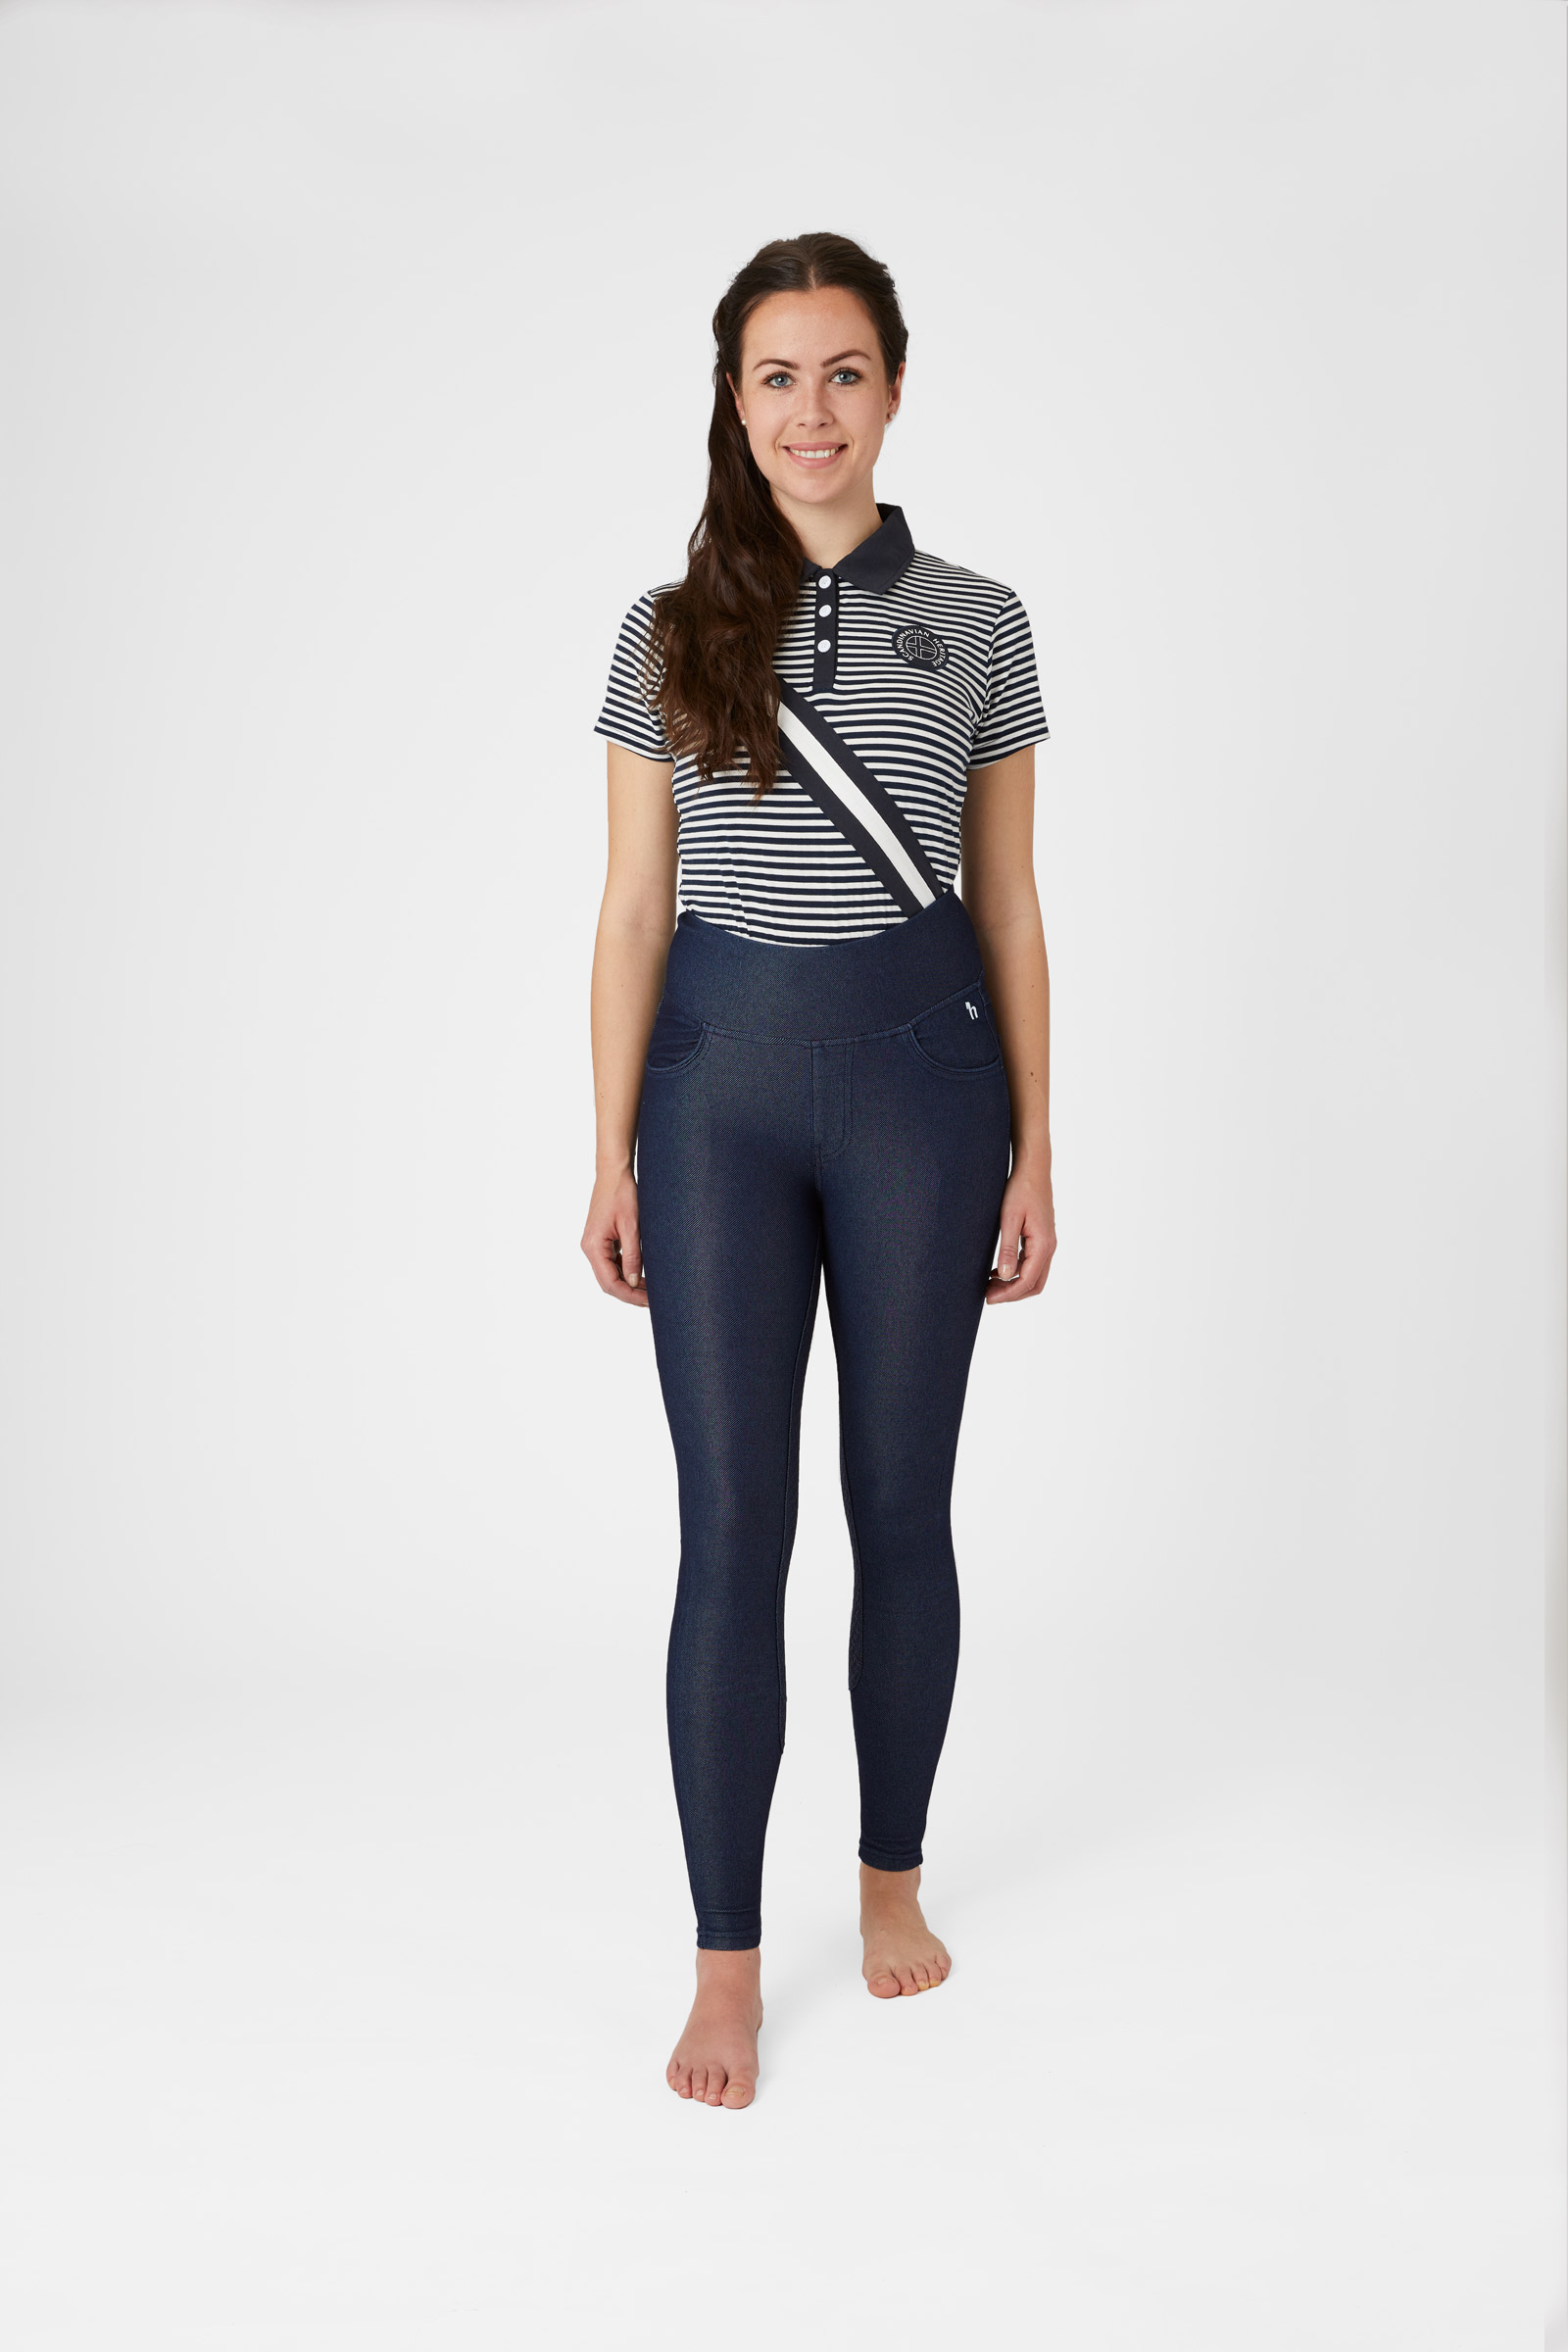 Horze Katia Denim Look Full Seat Tights at Tractor Supply Co.